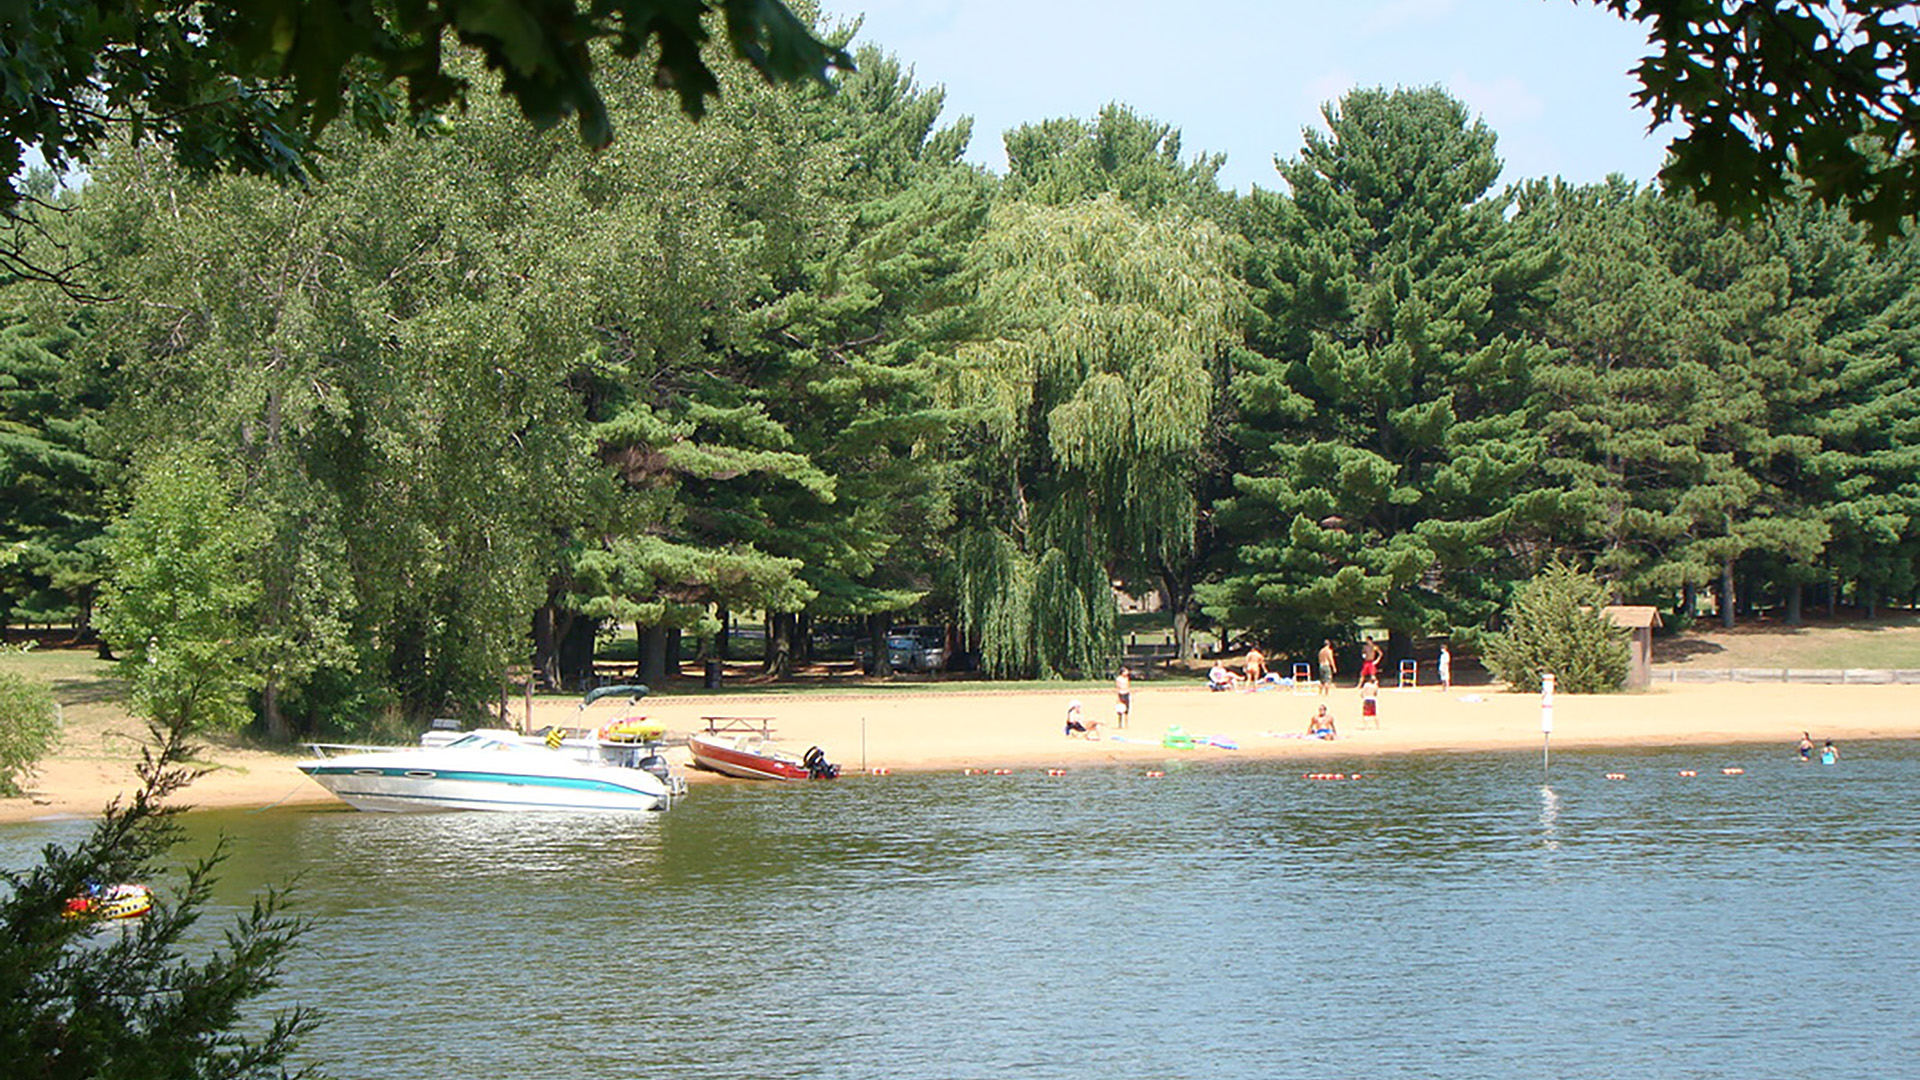 People gather on a sand beach with boats along the shore and trees in the background.